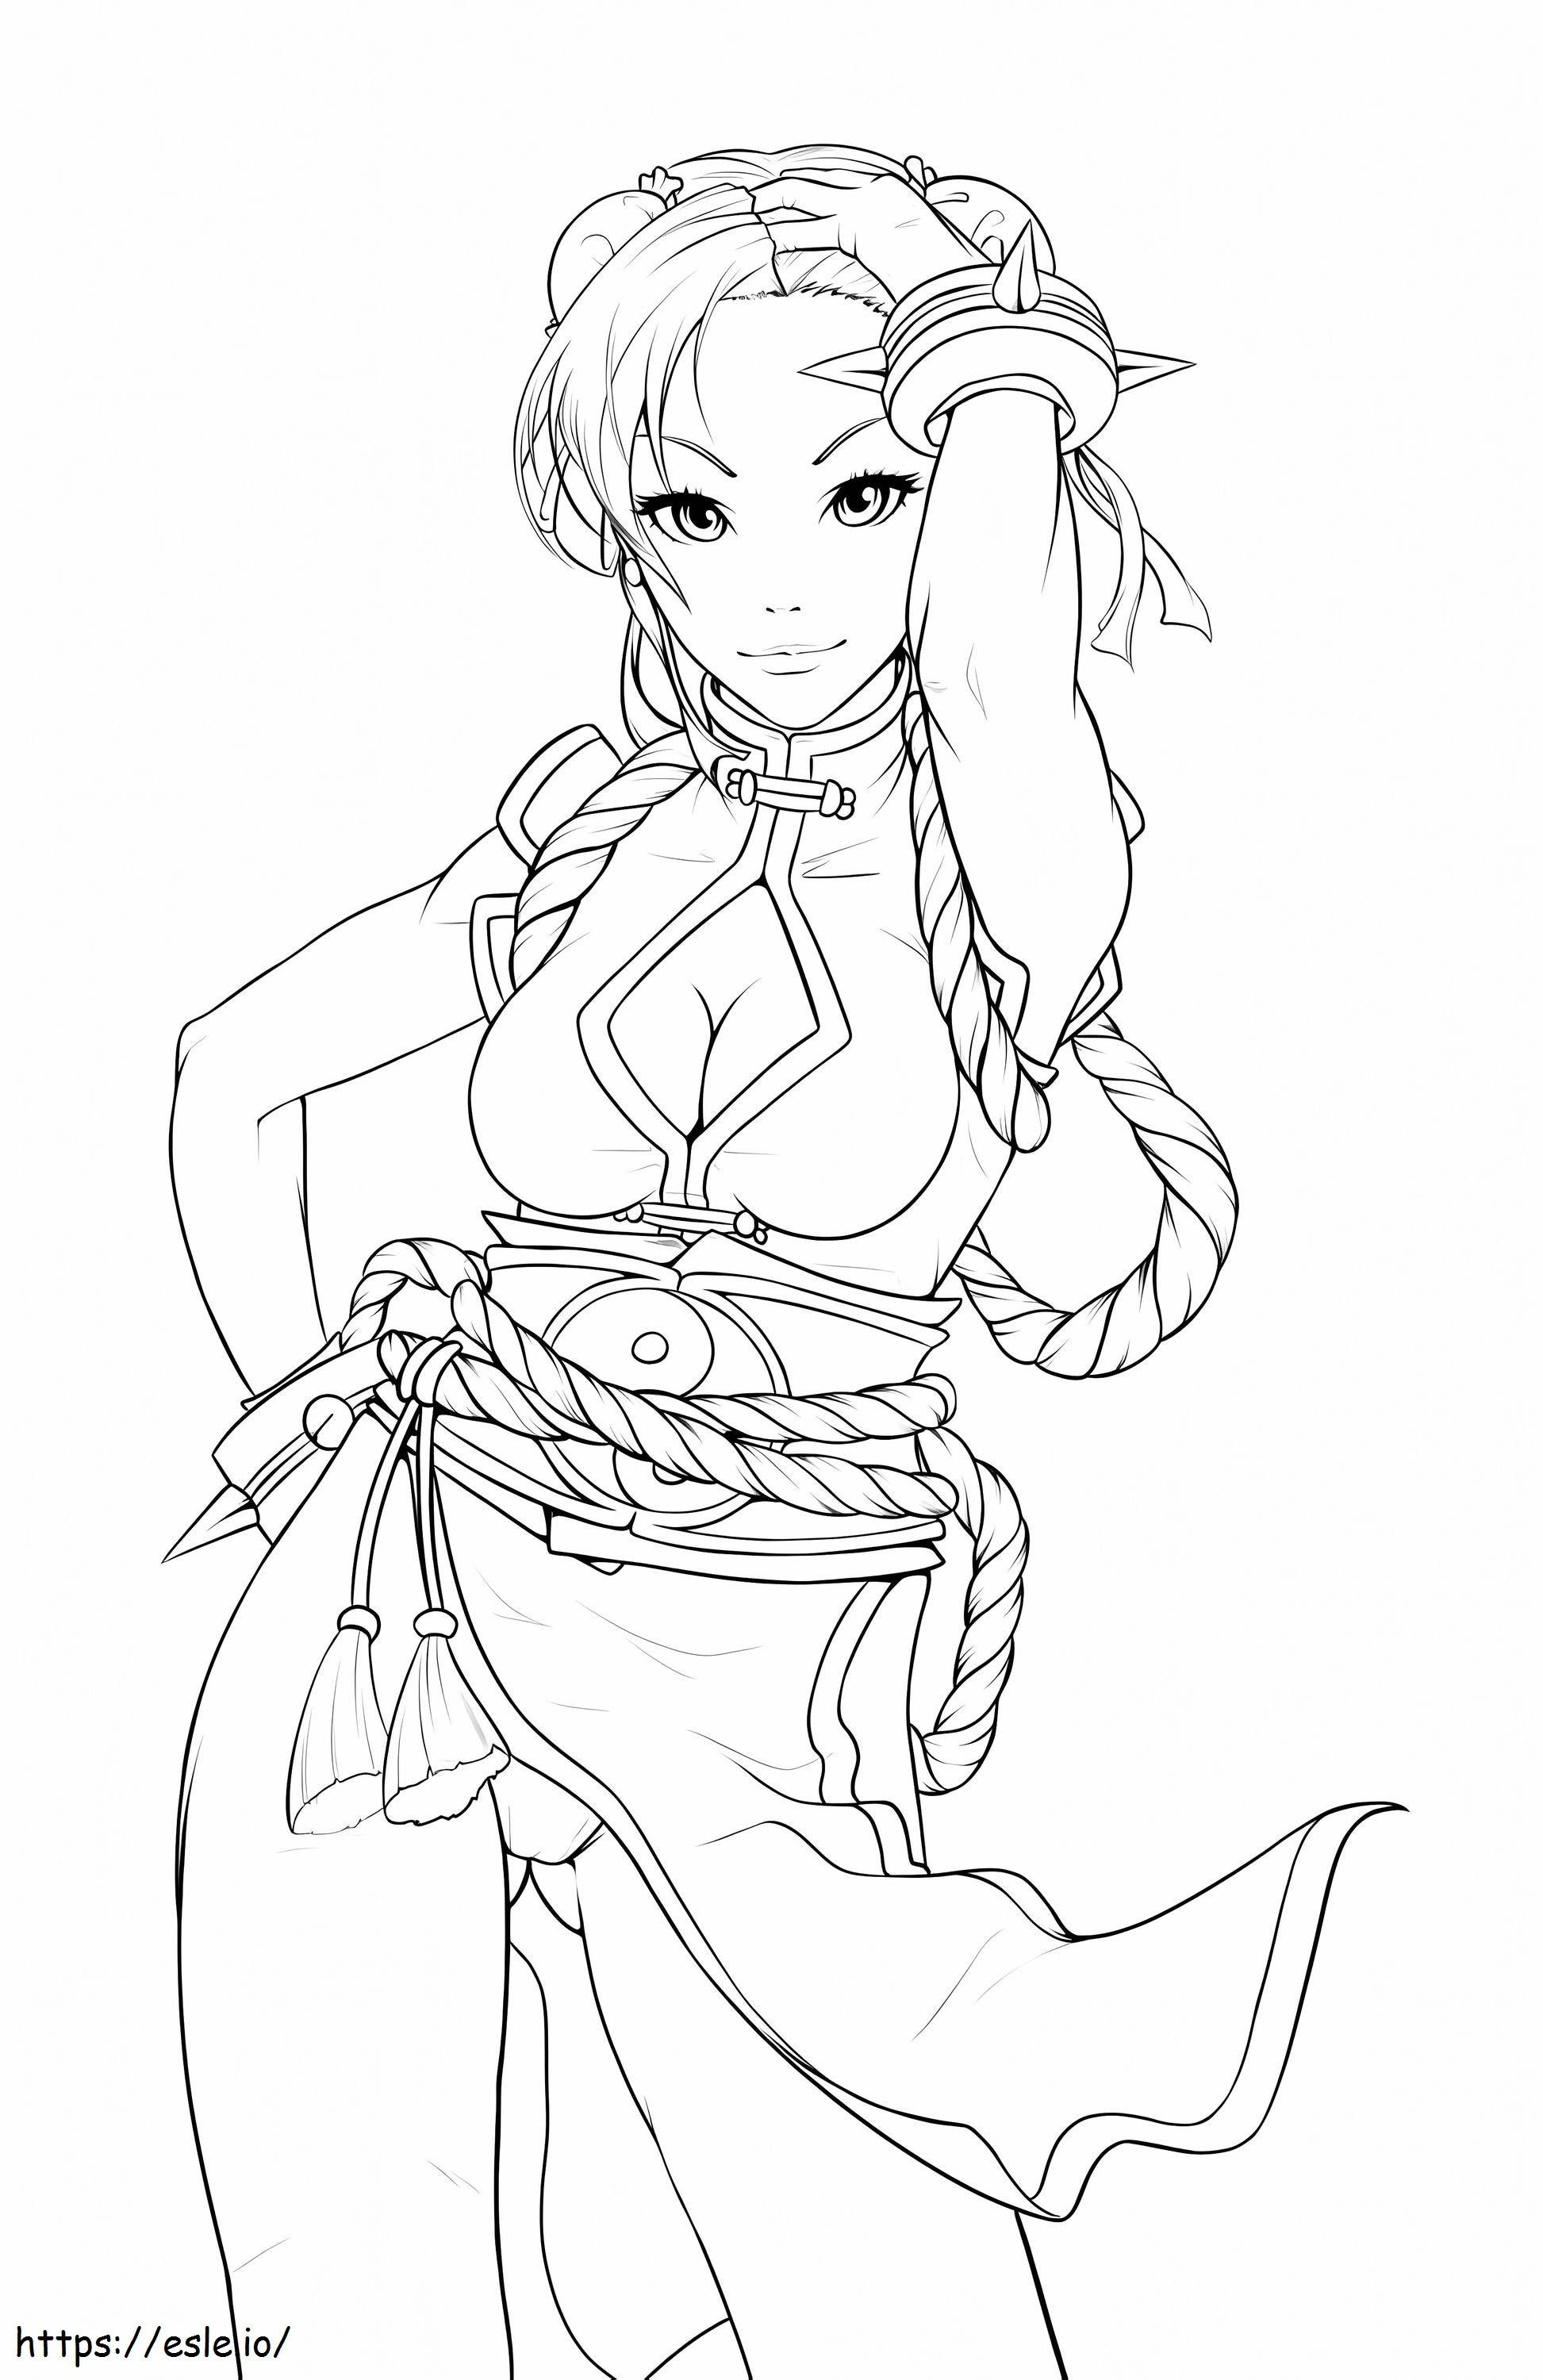 Chun Li From Street Fighter 1 coloring page